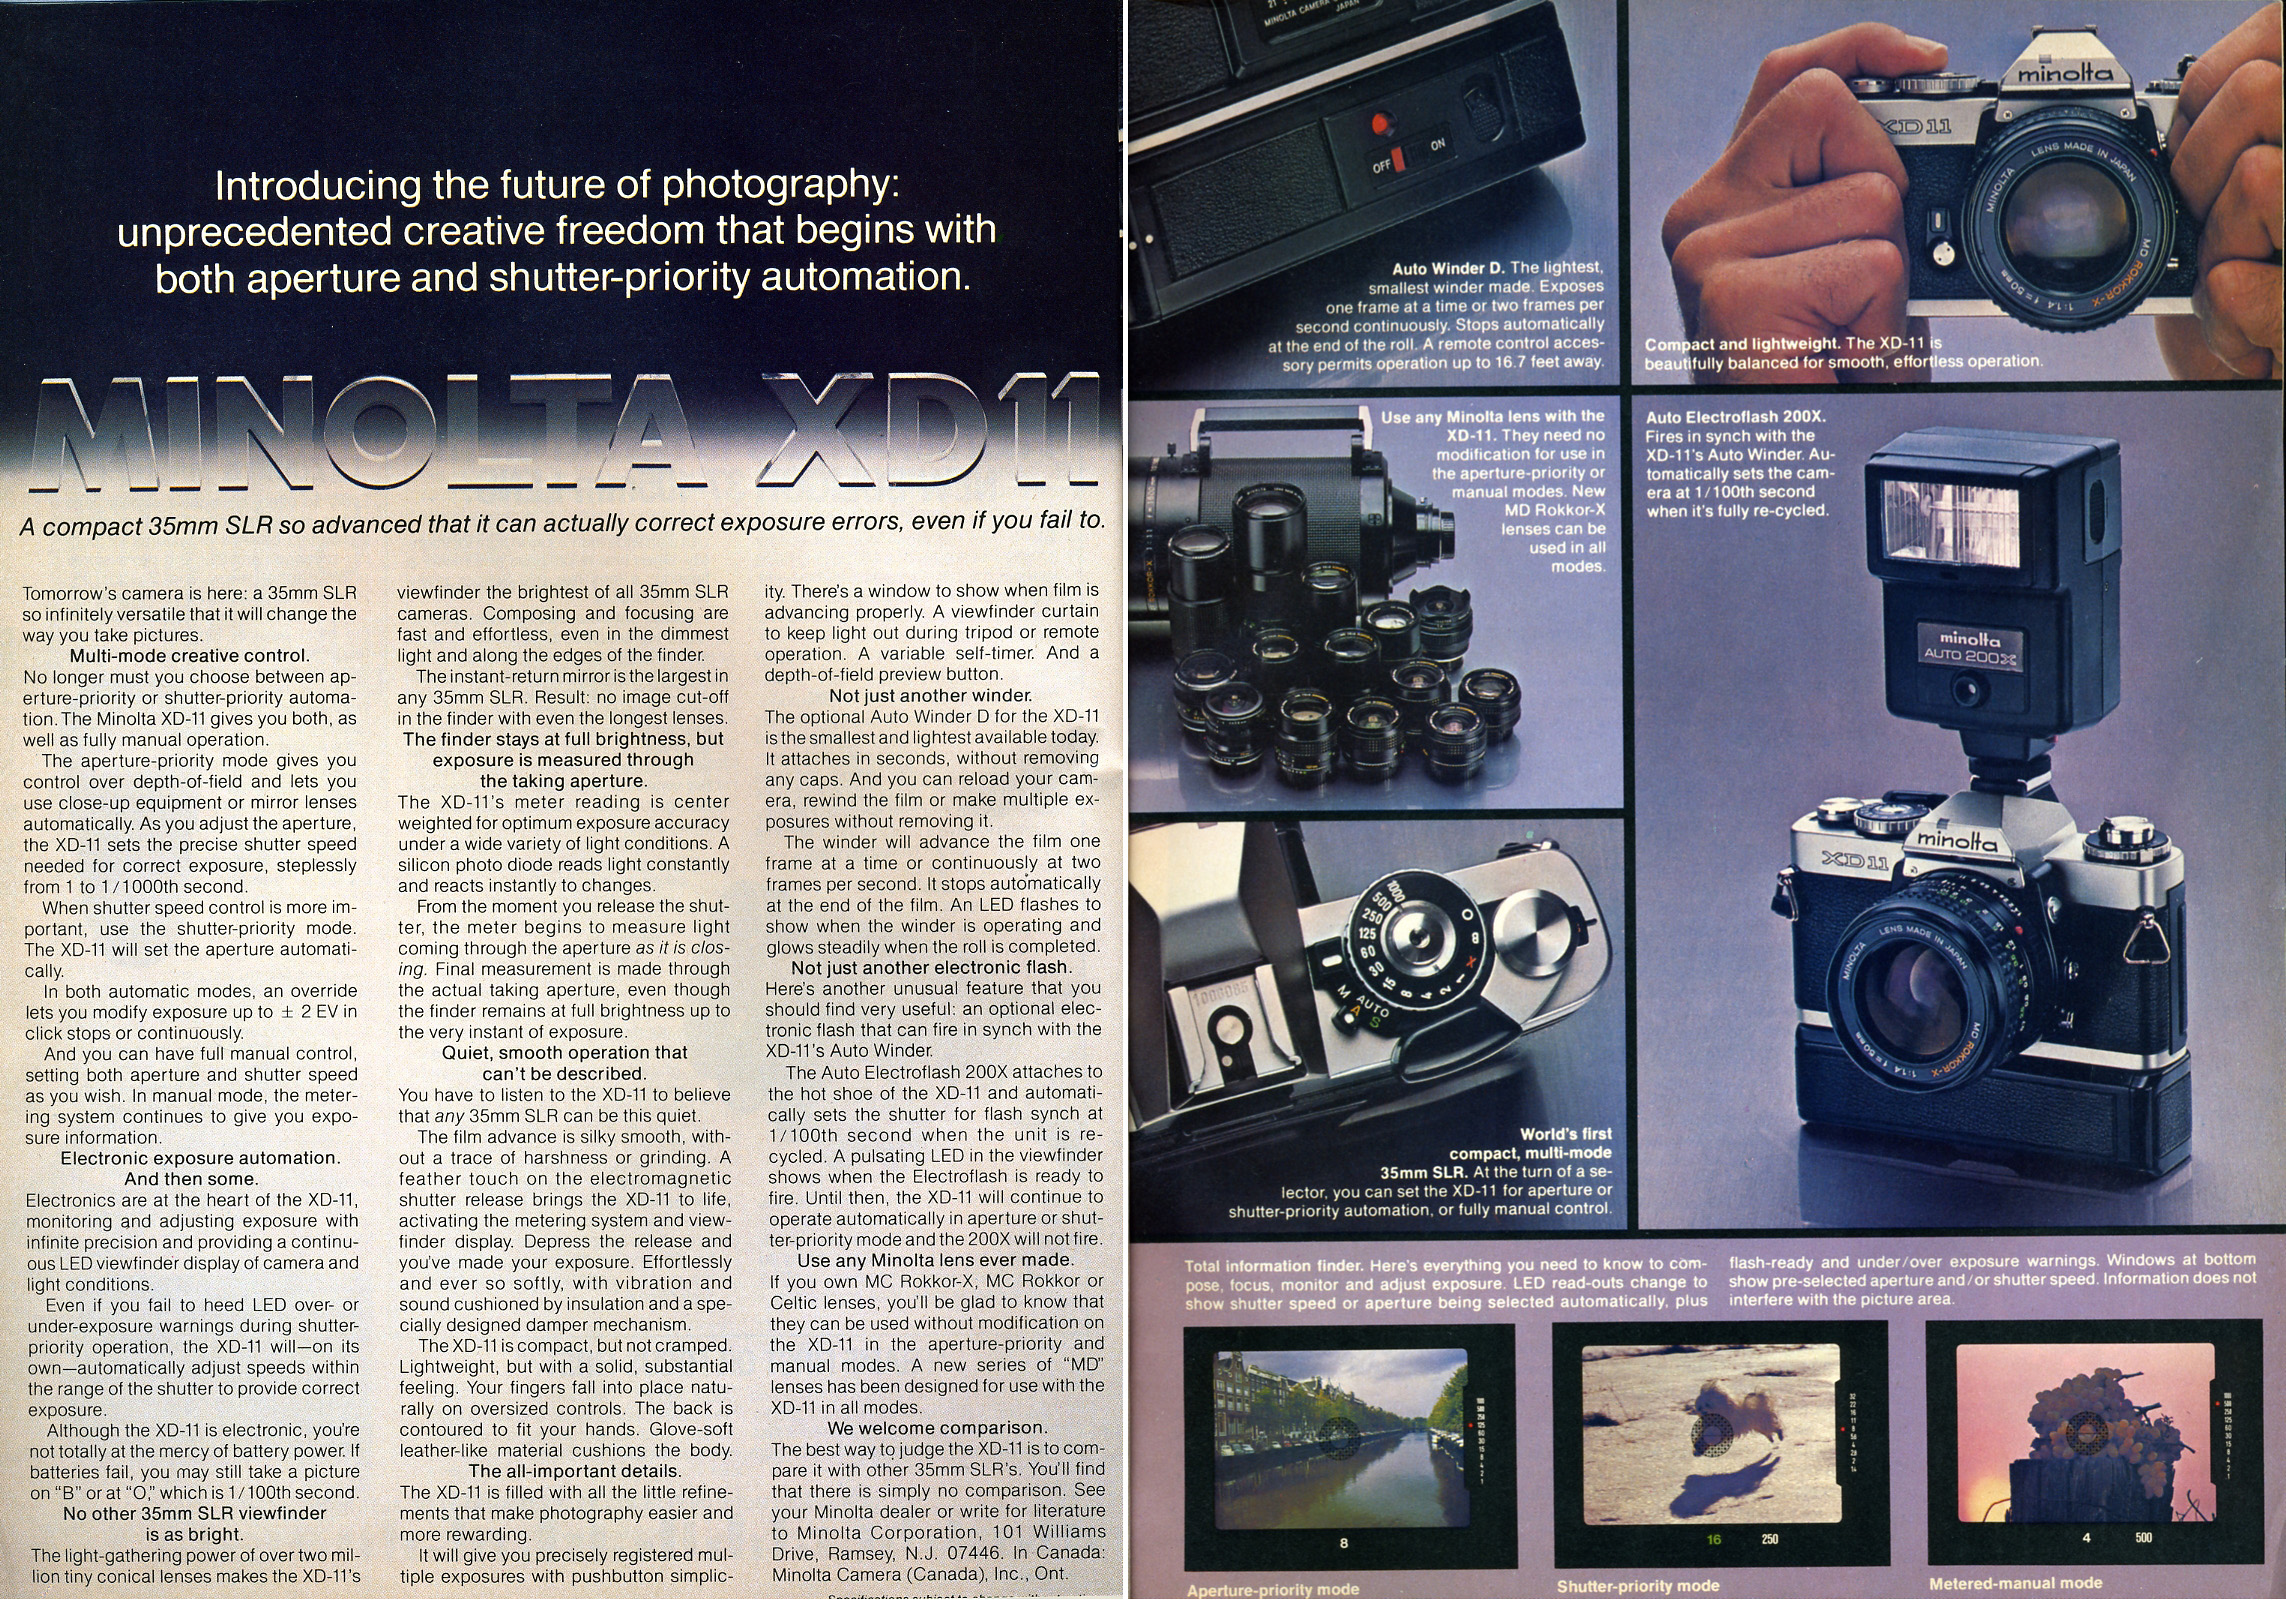 a magazine page from the 1960 era with camera equipment